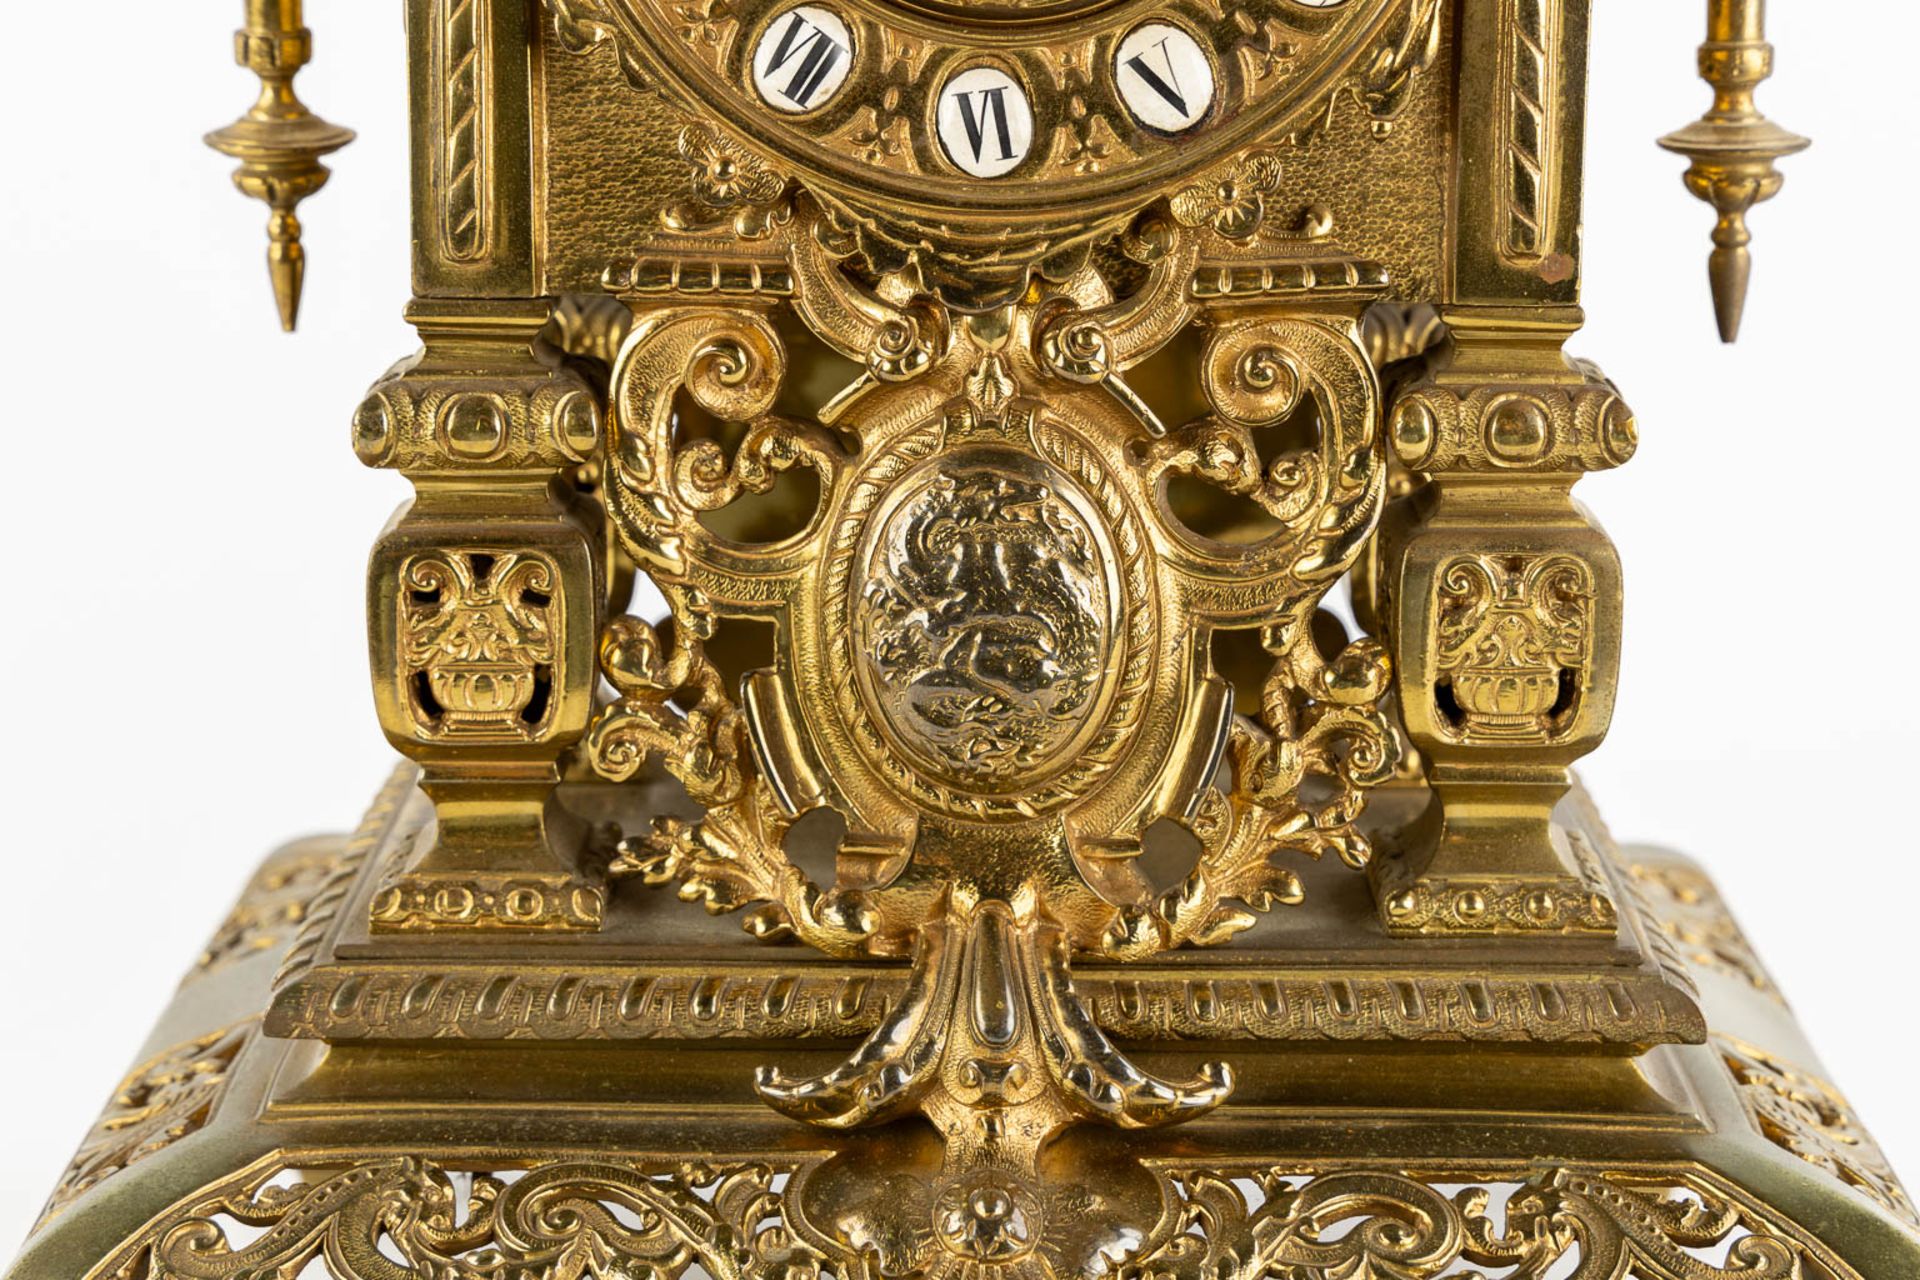 A mantle clock, bronze decorated with angels. Circa 1900. (L:21 x W:27 x H:54 cm) - Image 10 of 13